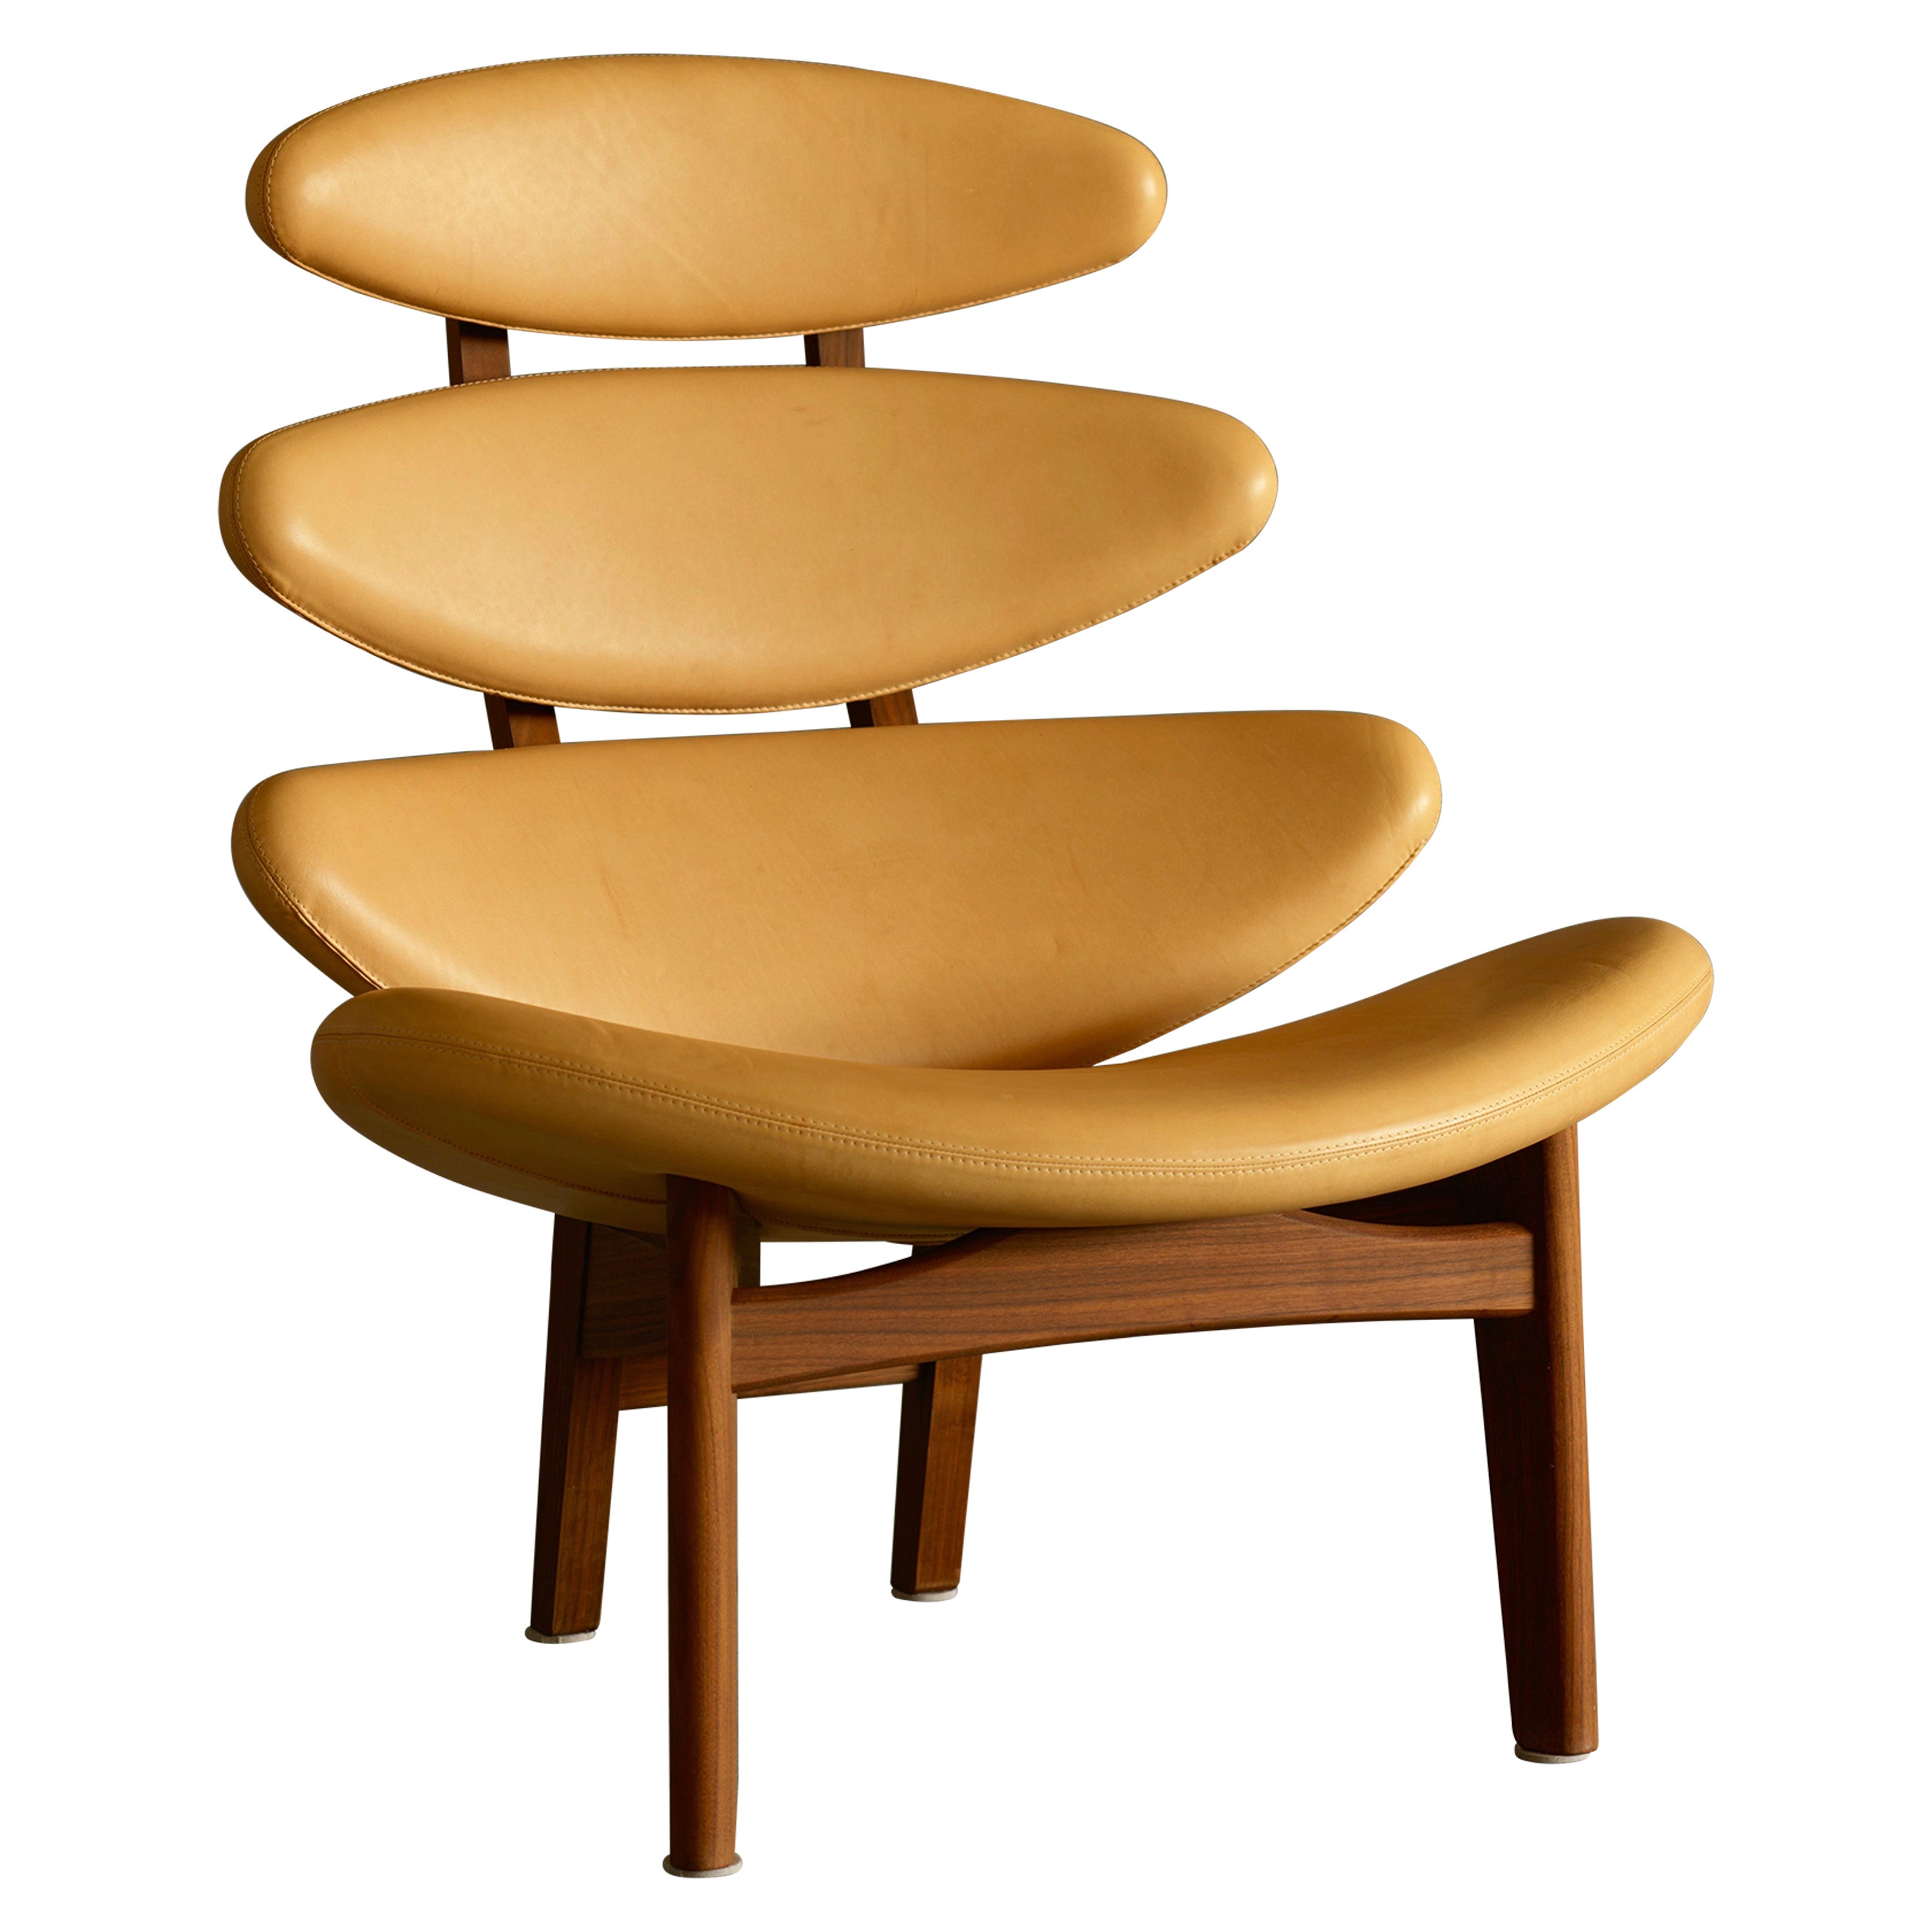 Poul Volther, Corona Chair For Sale